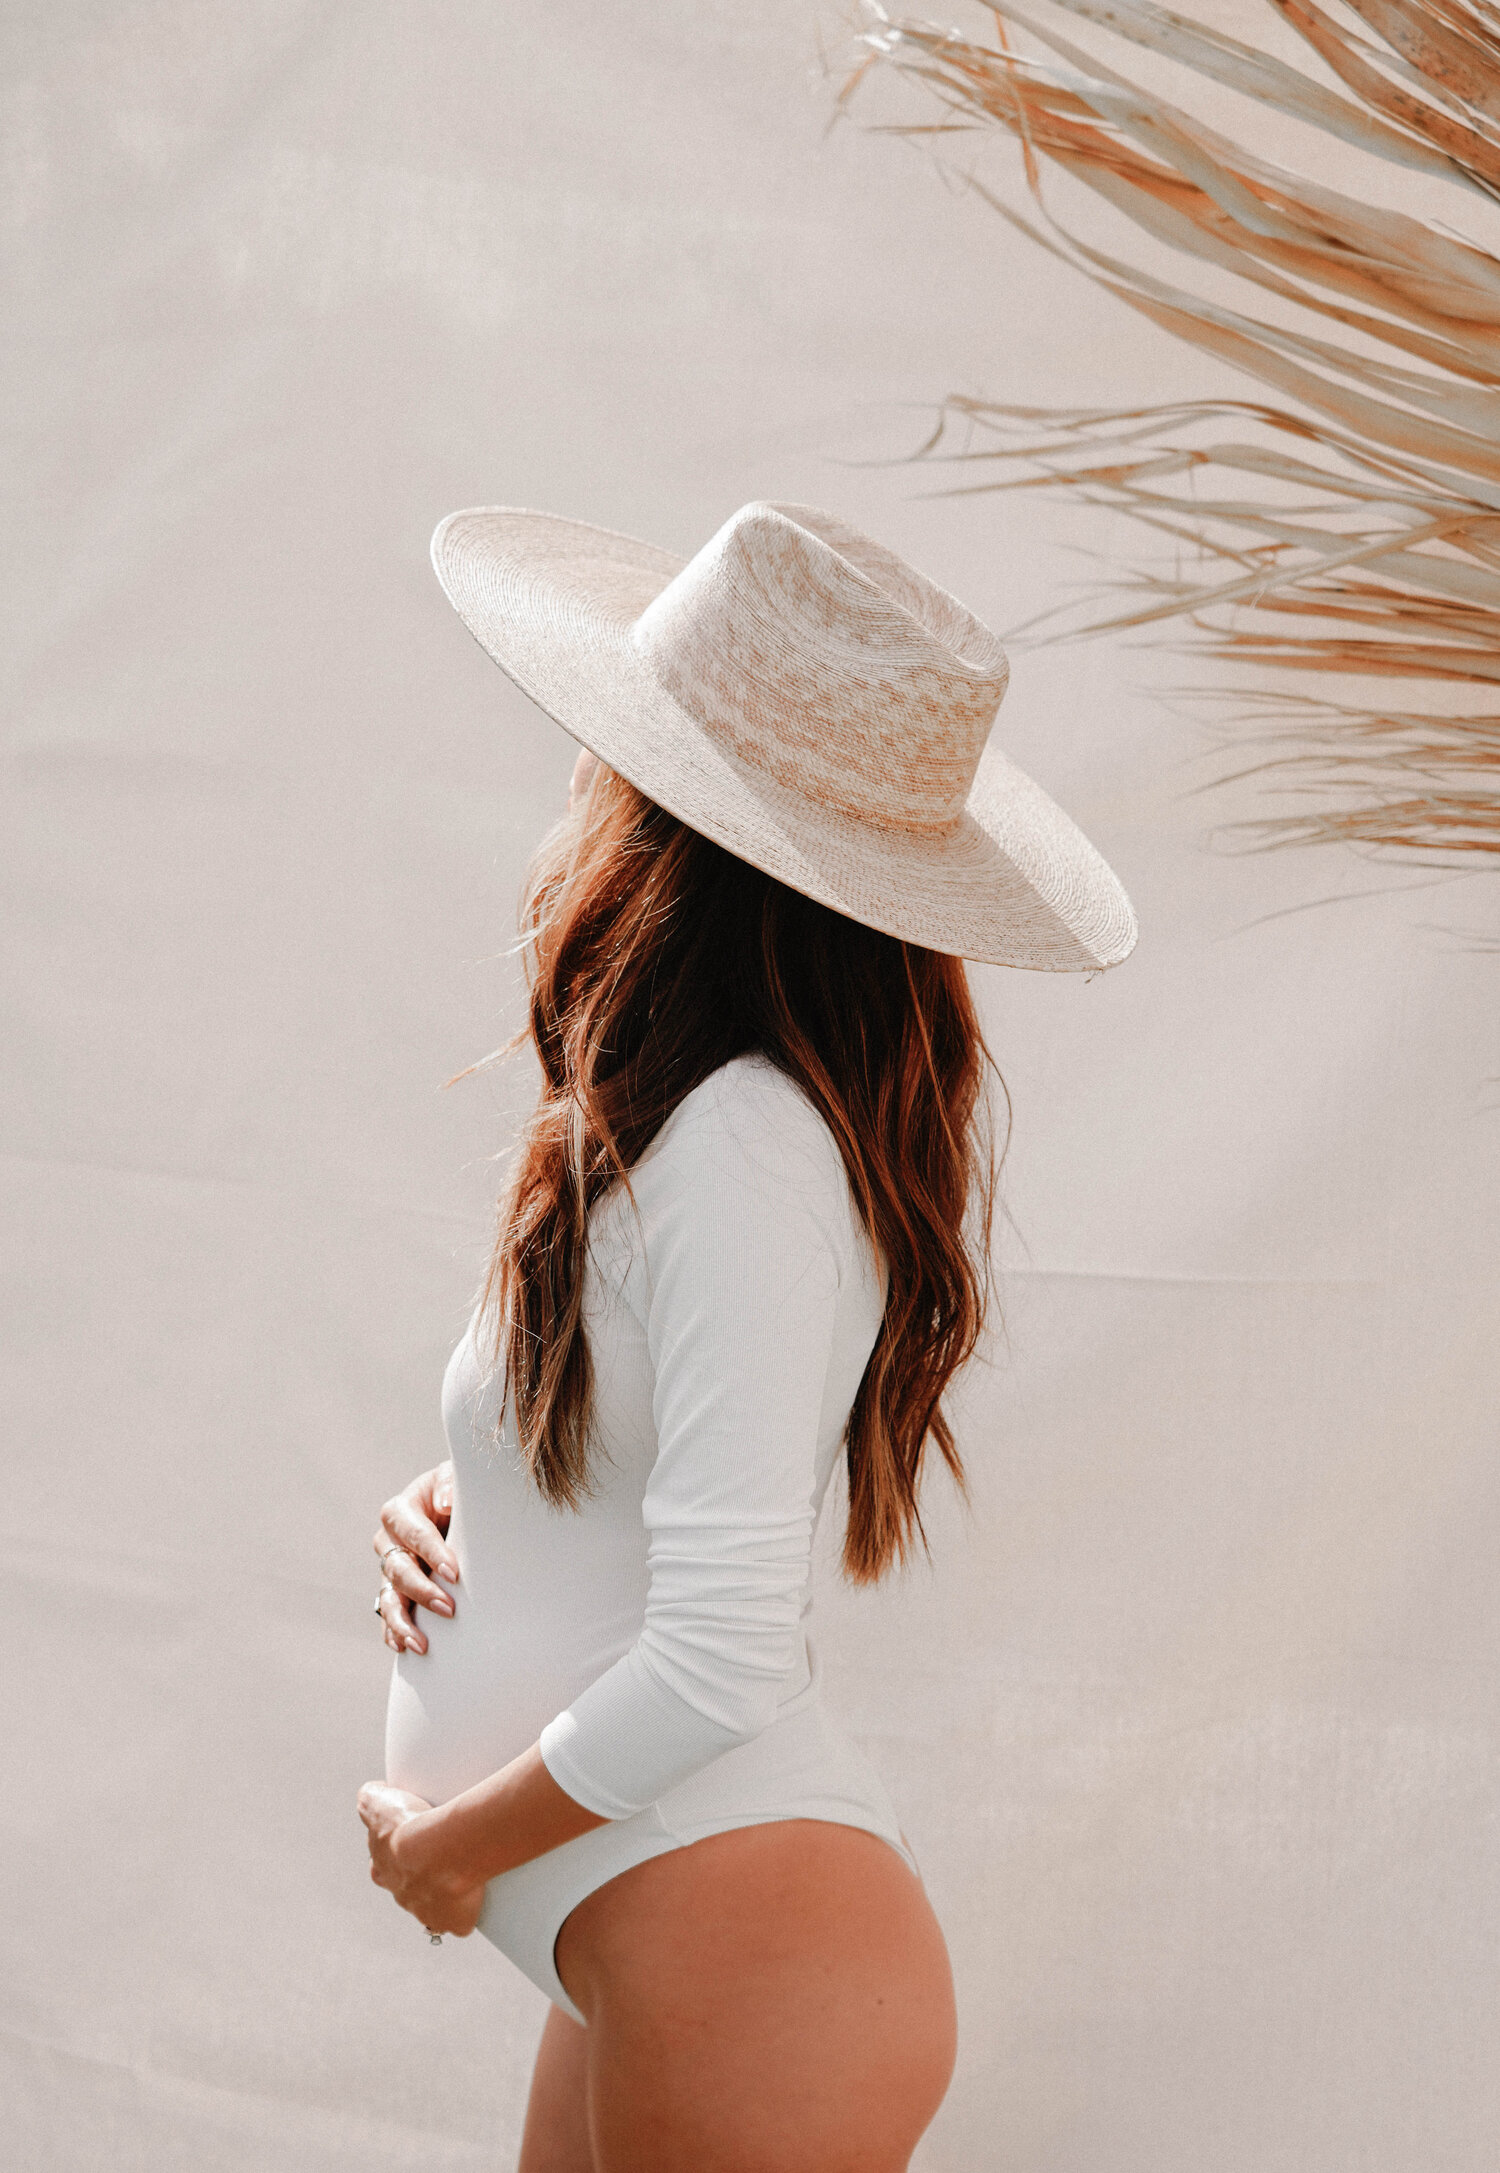 10 Outfit Ideas for Your Home Maternity Shoot — Everyday Pursuits